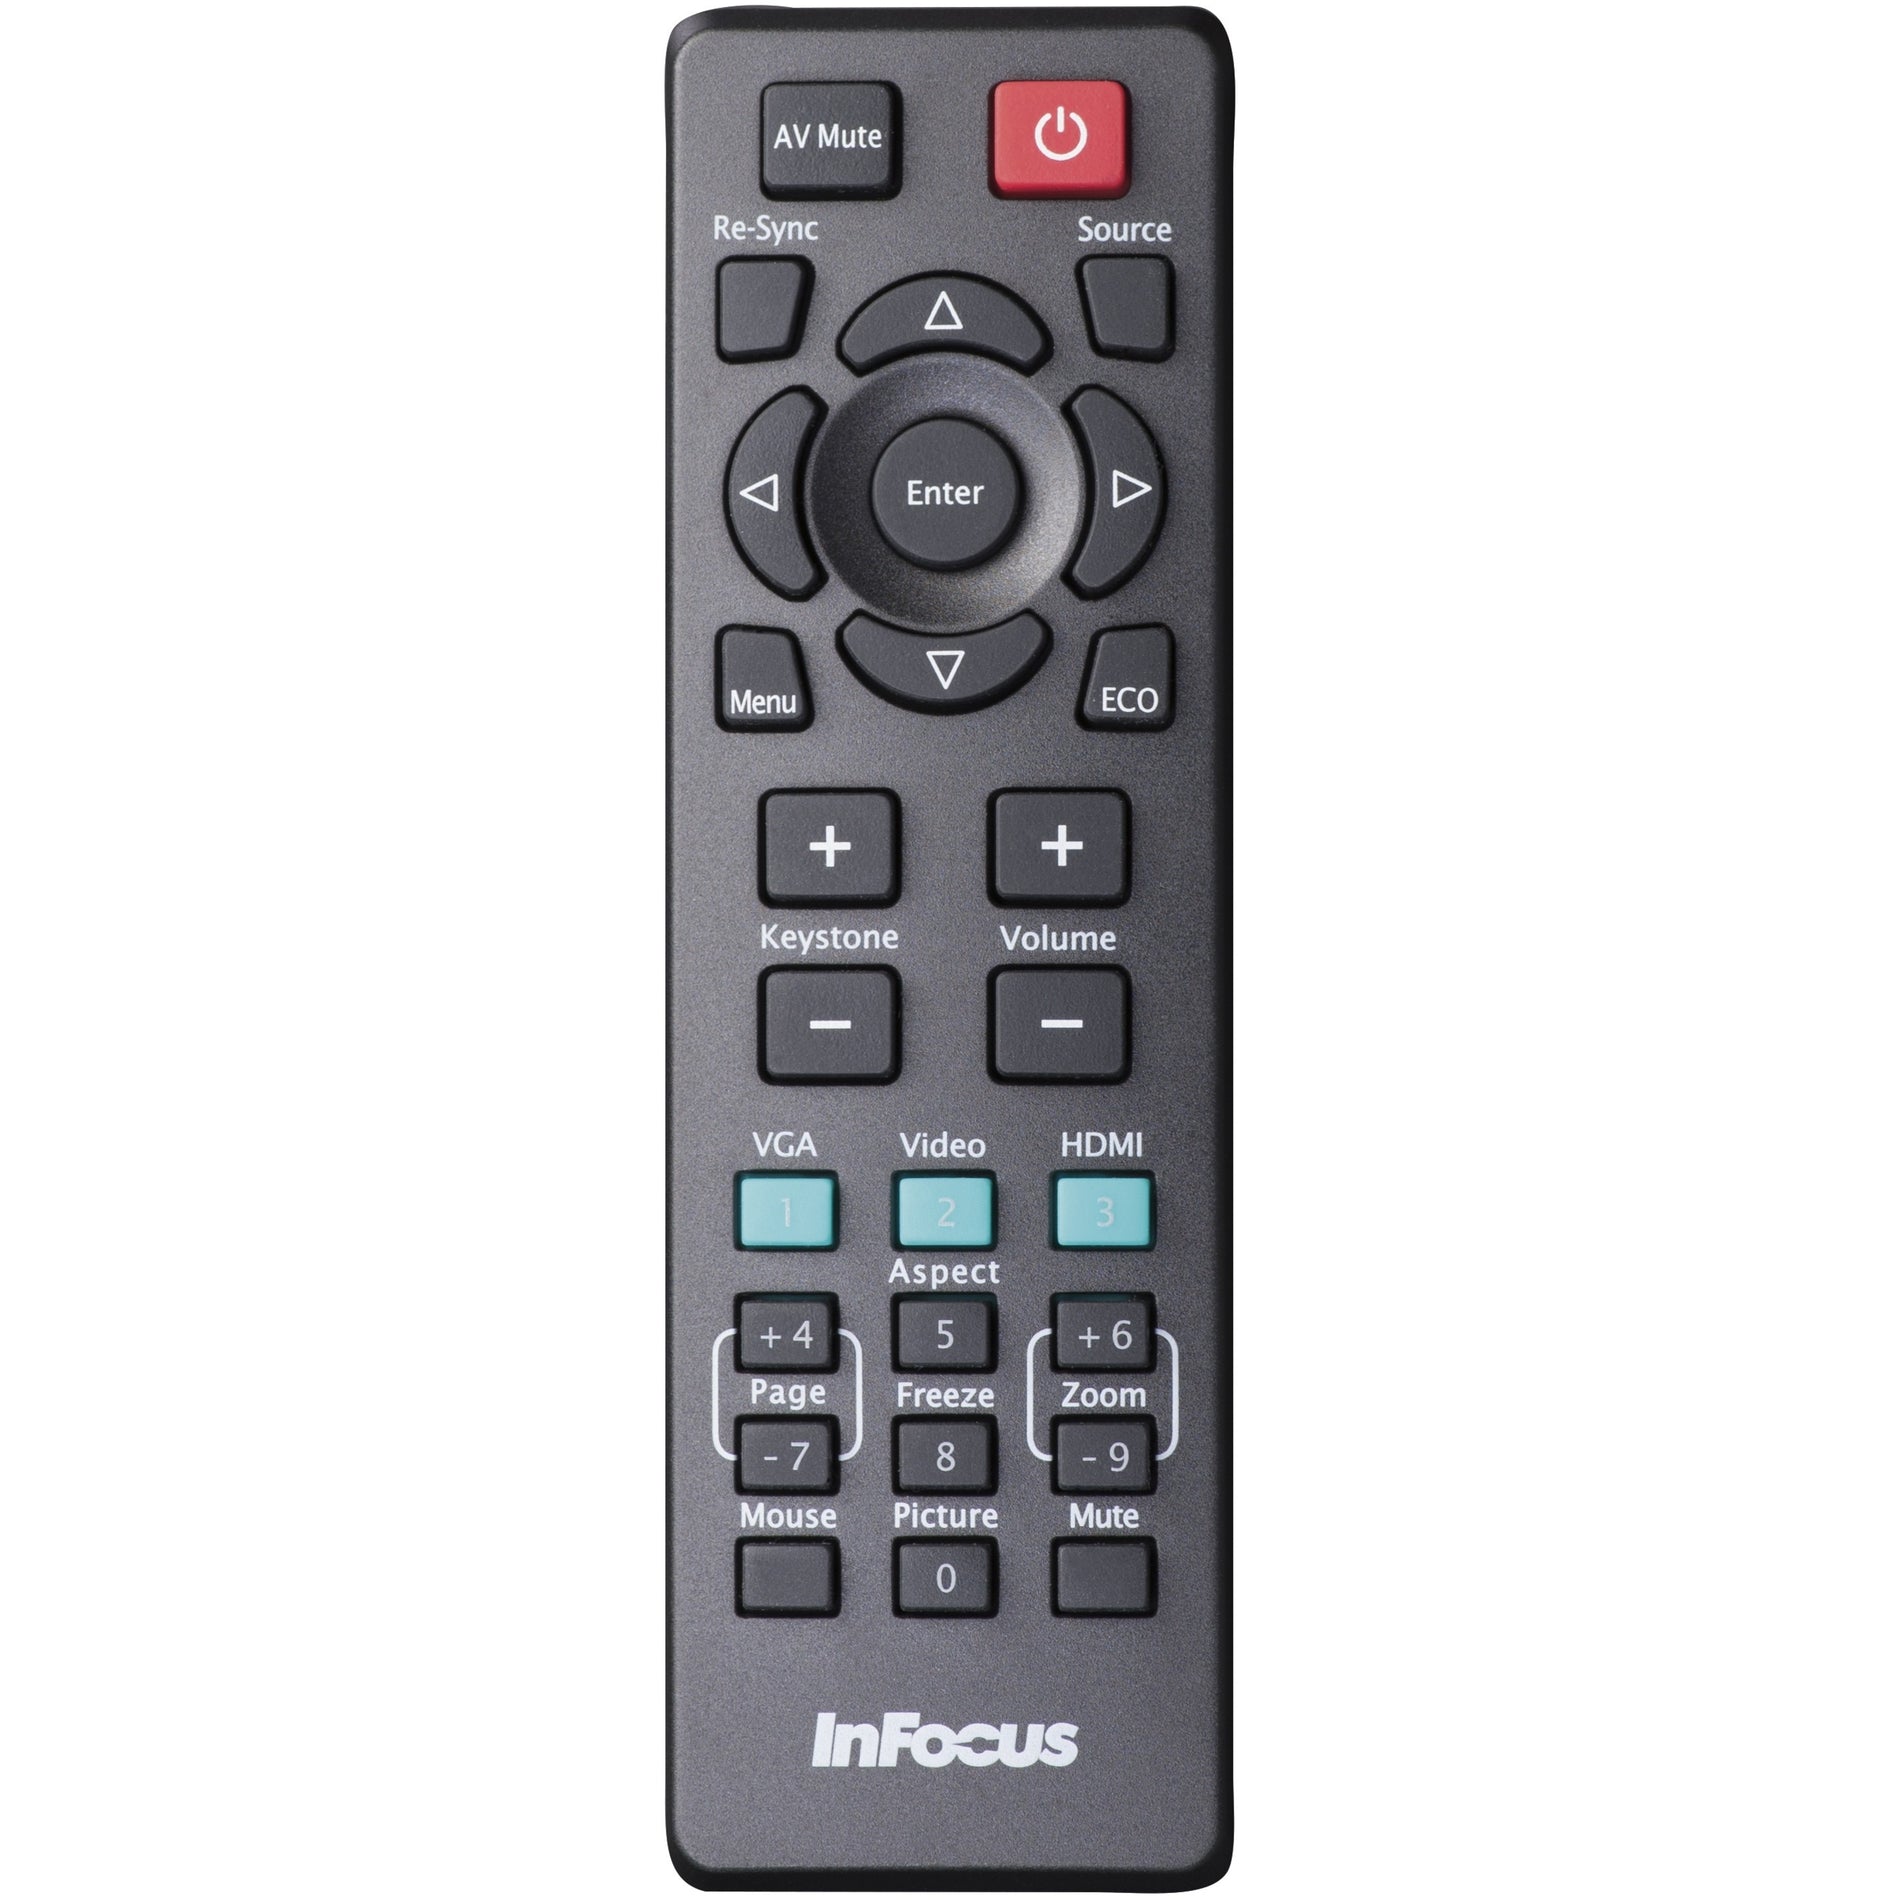 InFocus HW-NAVIGATOR-5 Standard Replacement Remote, Compatible with IN110x, IN120x, IN120STx, IN130, IN130ST, IN2120x, IN2130, IN3130a, IN3140, IN5140, IN5310a, IN1110, IN8606HD, SP1080 Projectors